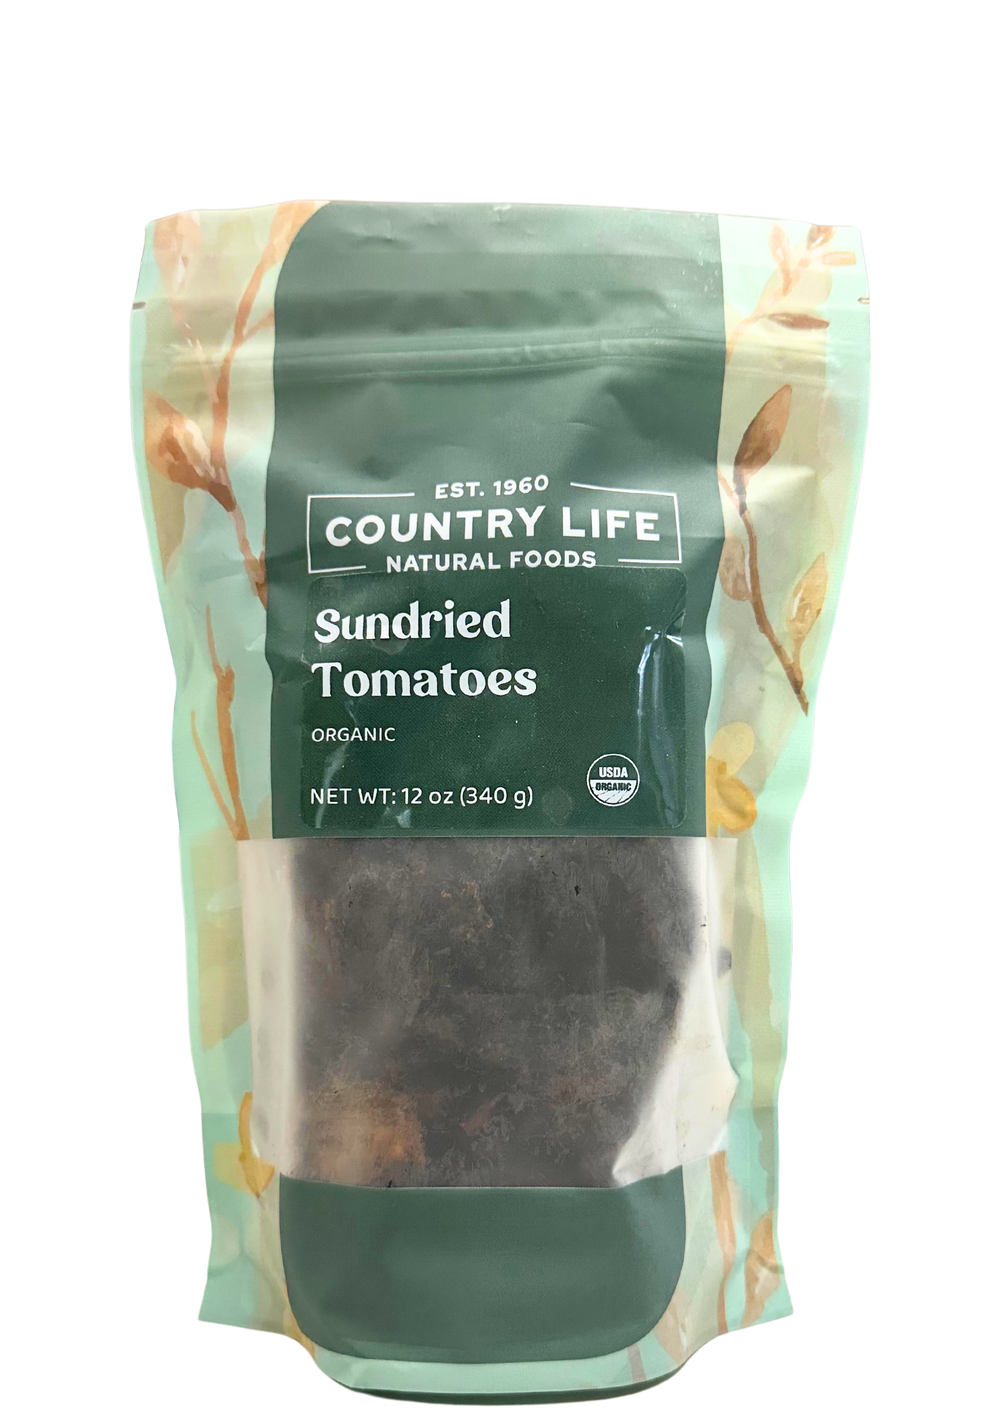 Tomato, Organic, Sundried, Halves - Country Life Natural Foods